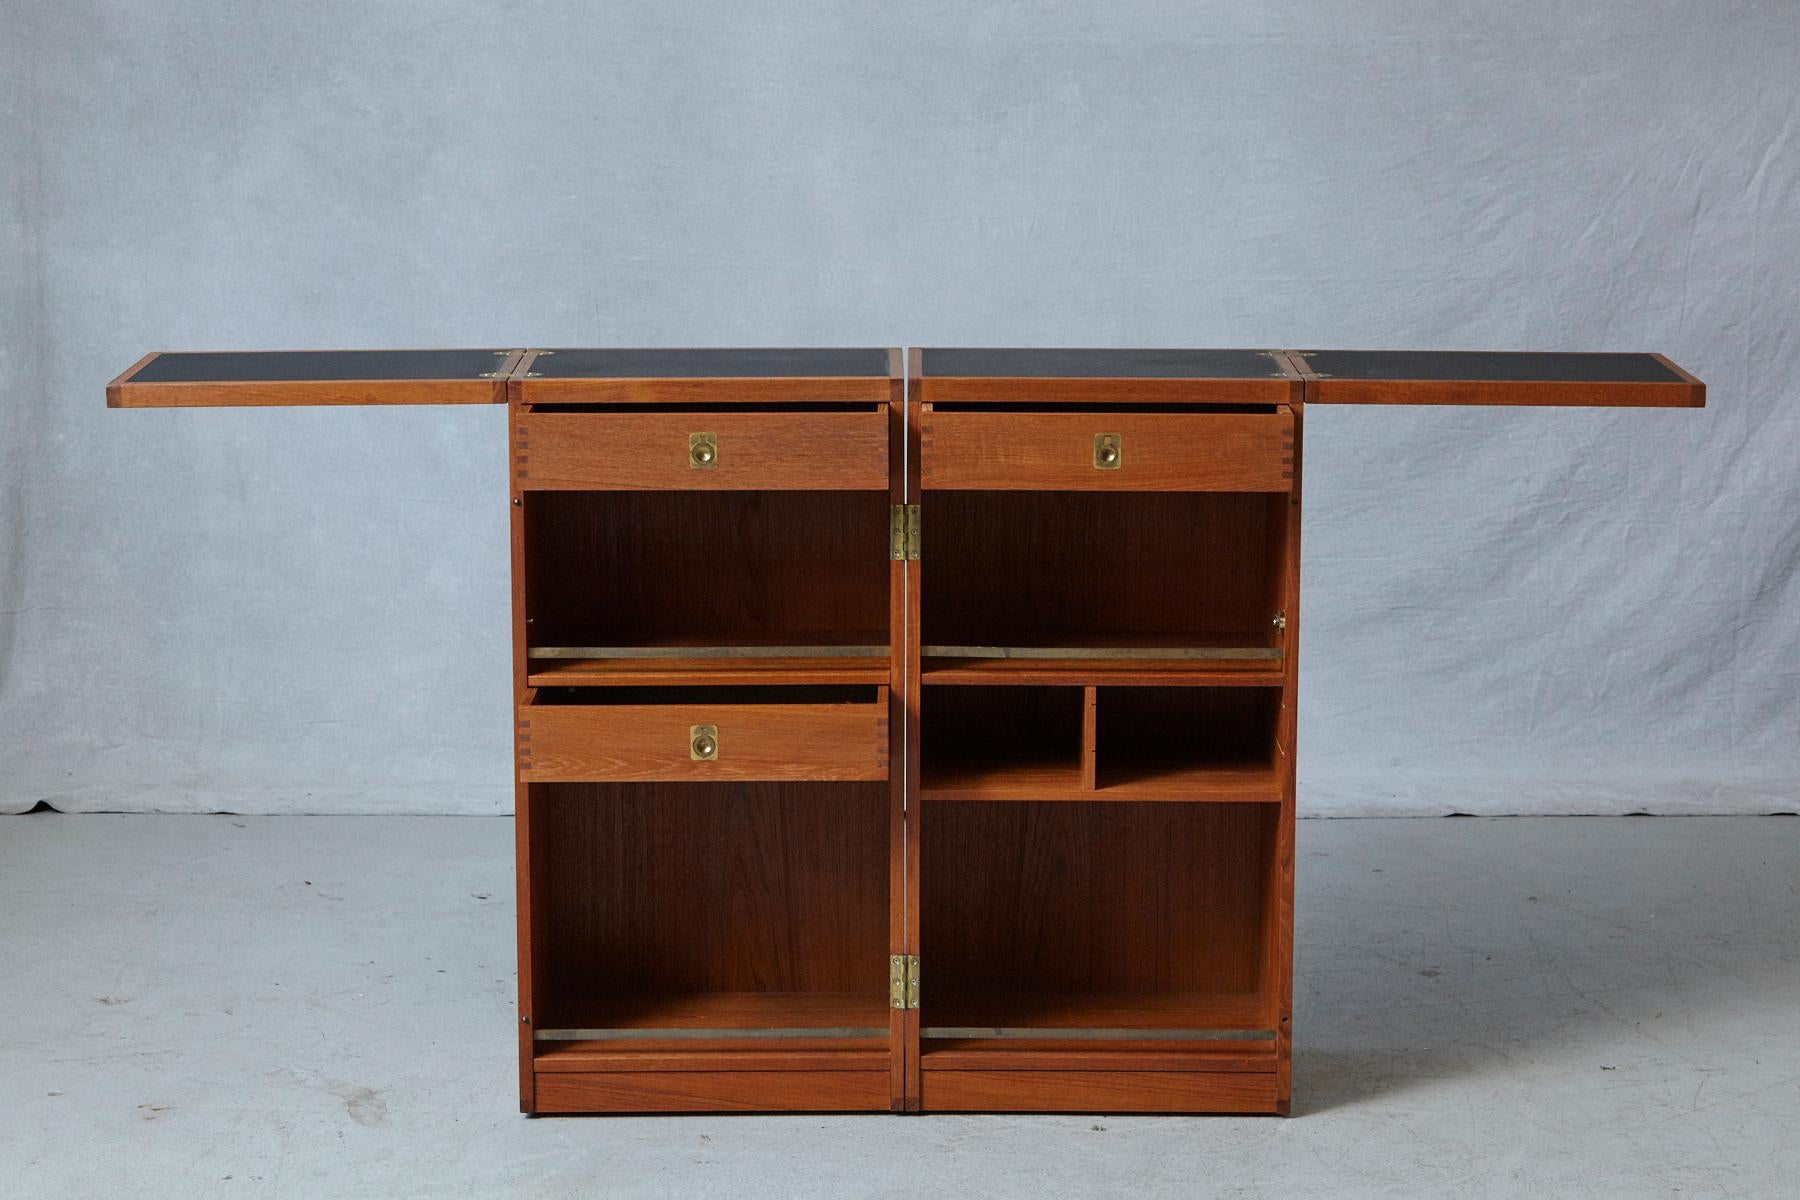 'Captain's Bar', an exceptional teak and brass bar on casters by Danish designer Reno Wahl Iversen for Dyrlund, circa 1960s.
The metamorphic brass hinged cabinet opens to an interior fitted with three dovetailed drawers with brass hardware, the two